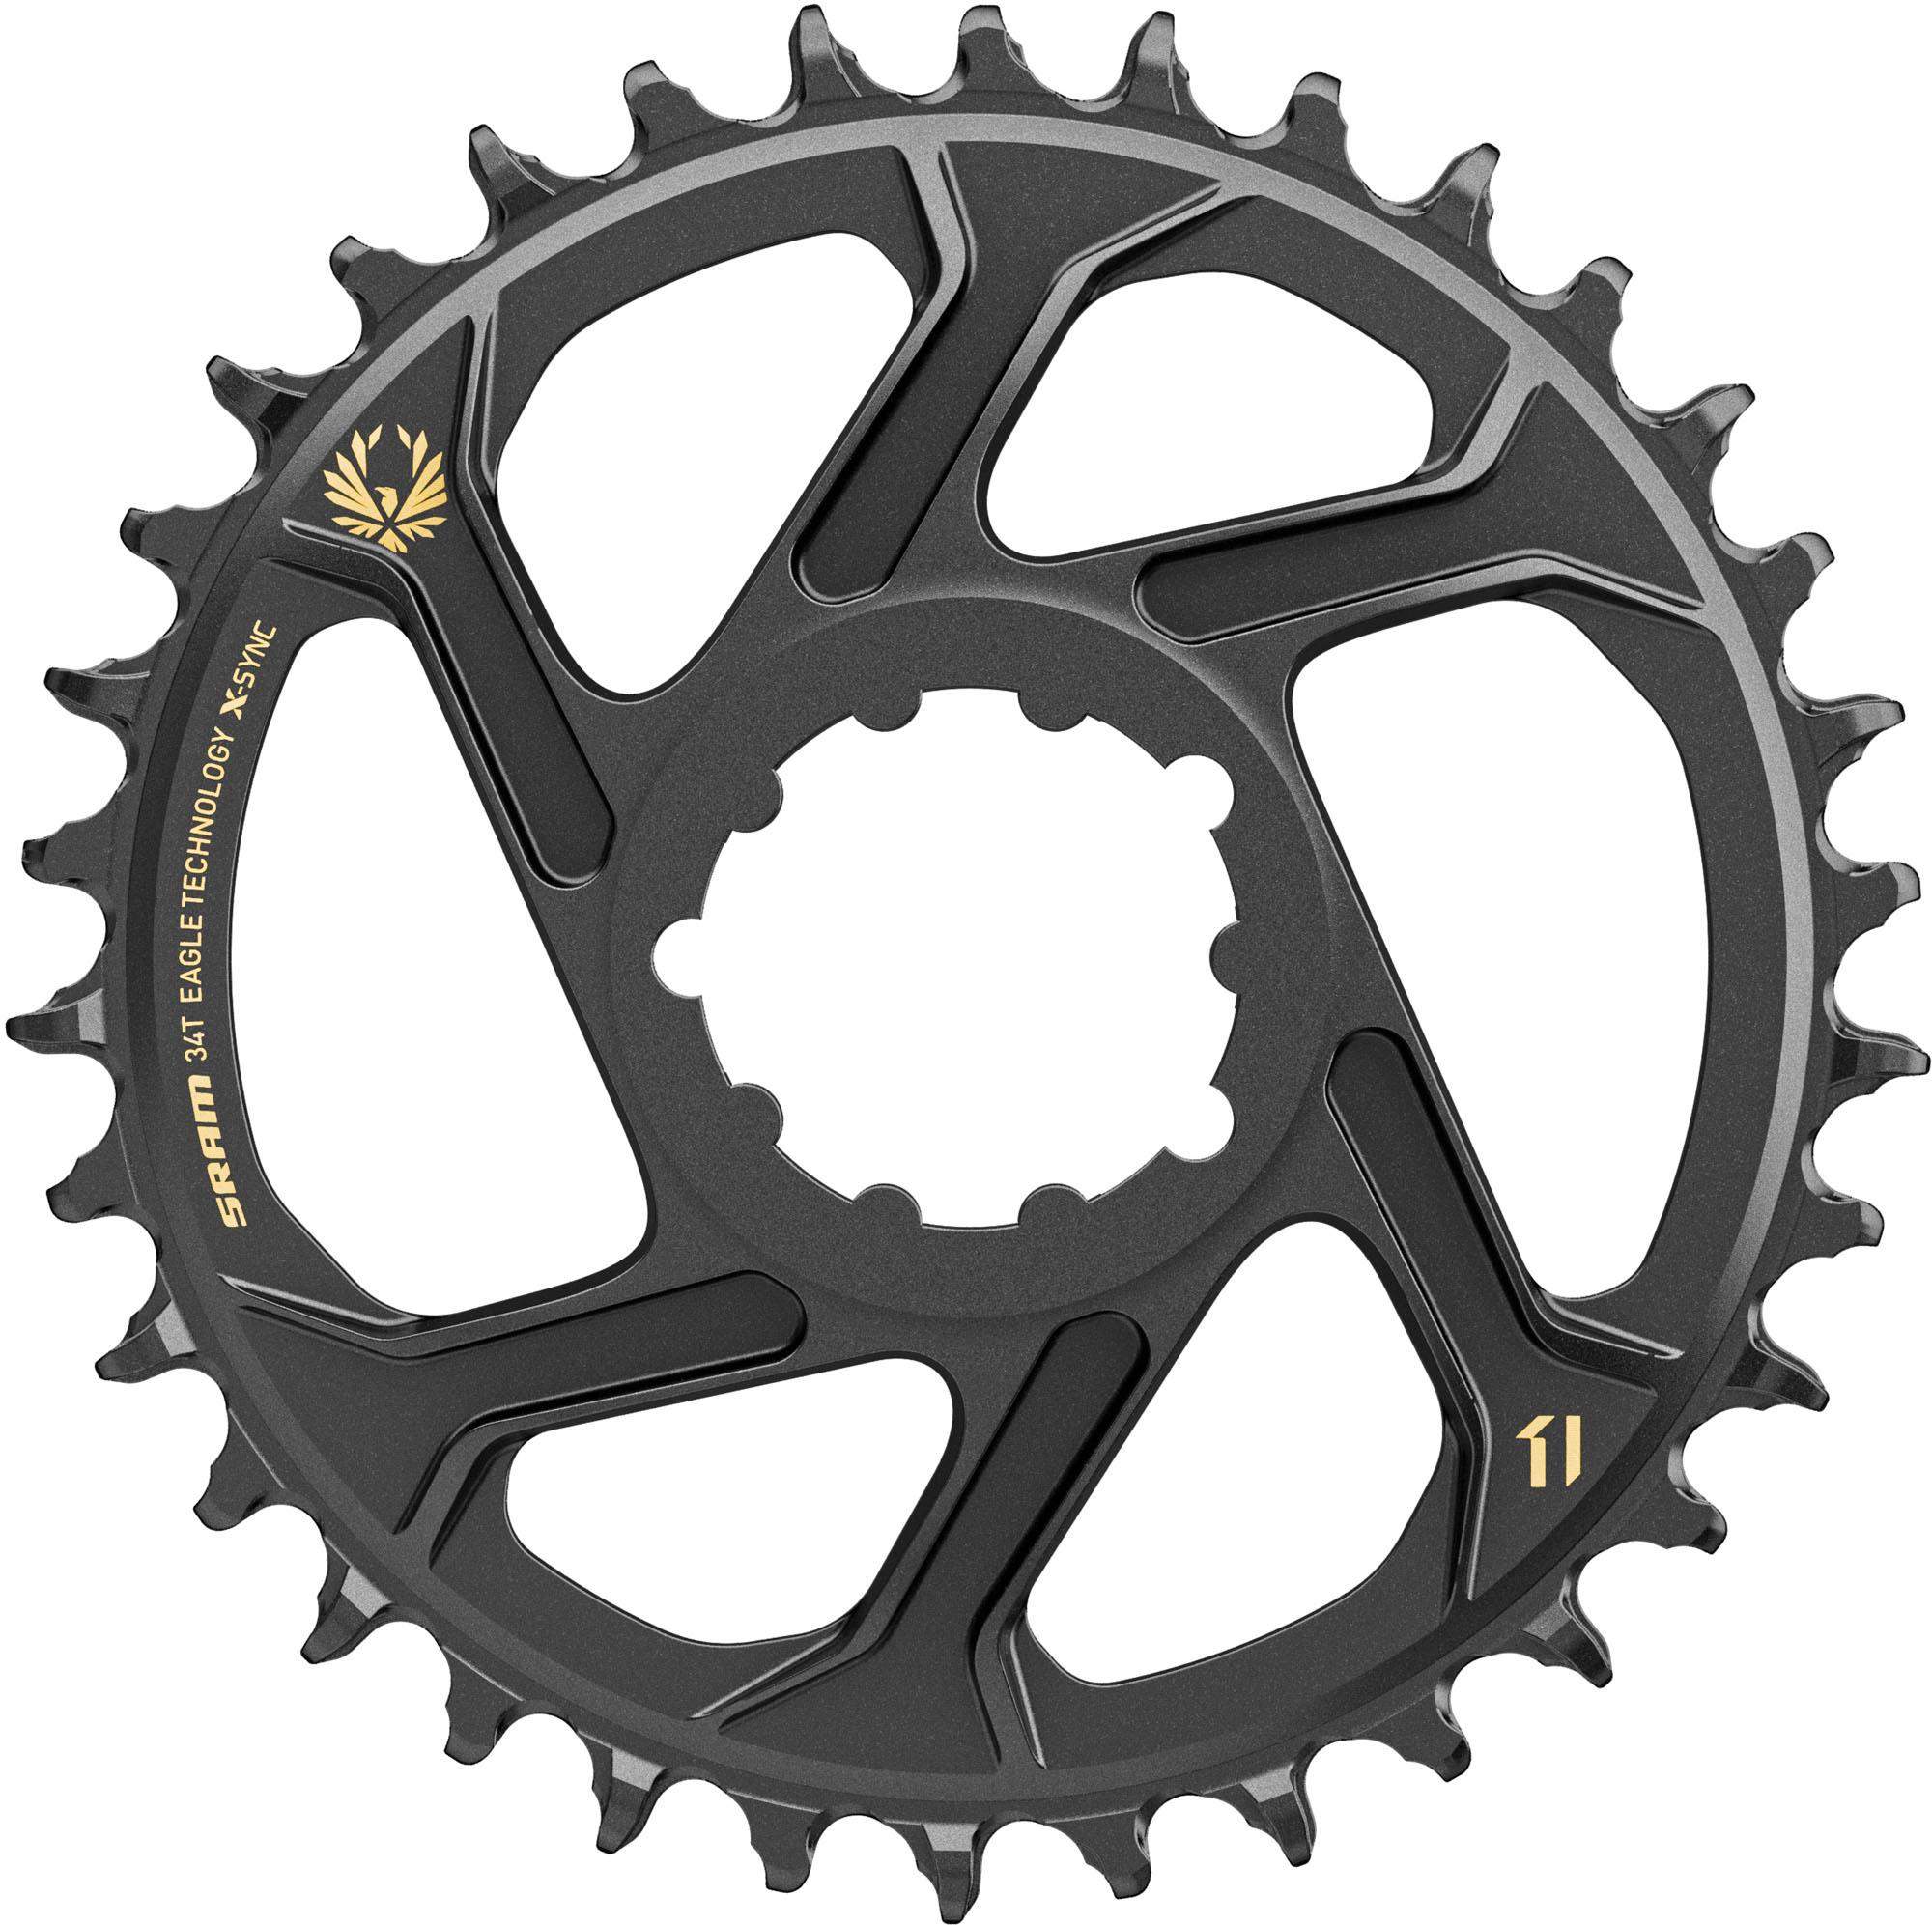 Sram X-sync Direct Mount Eagle Chainring - Gold